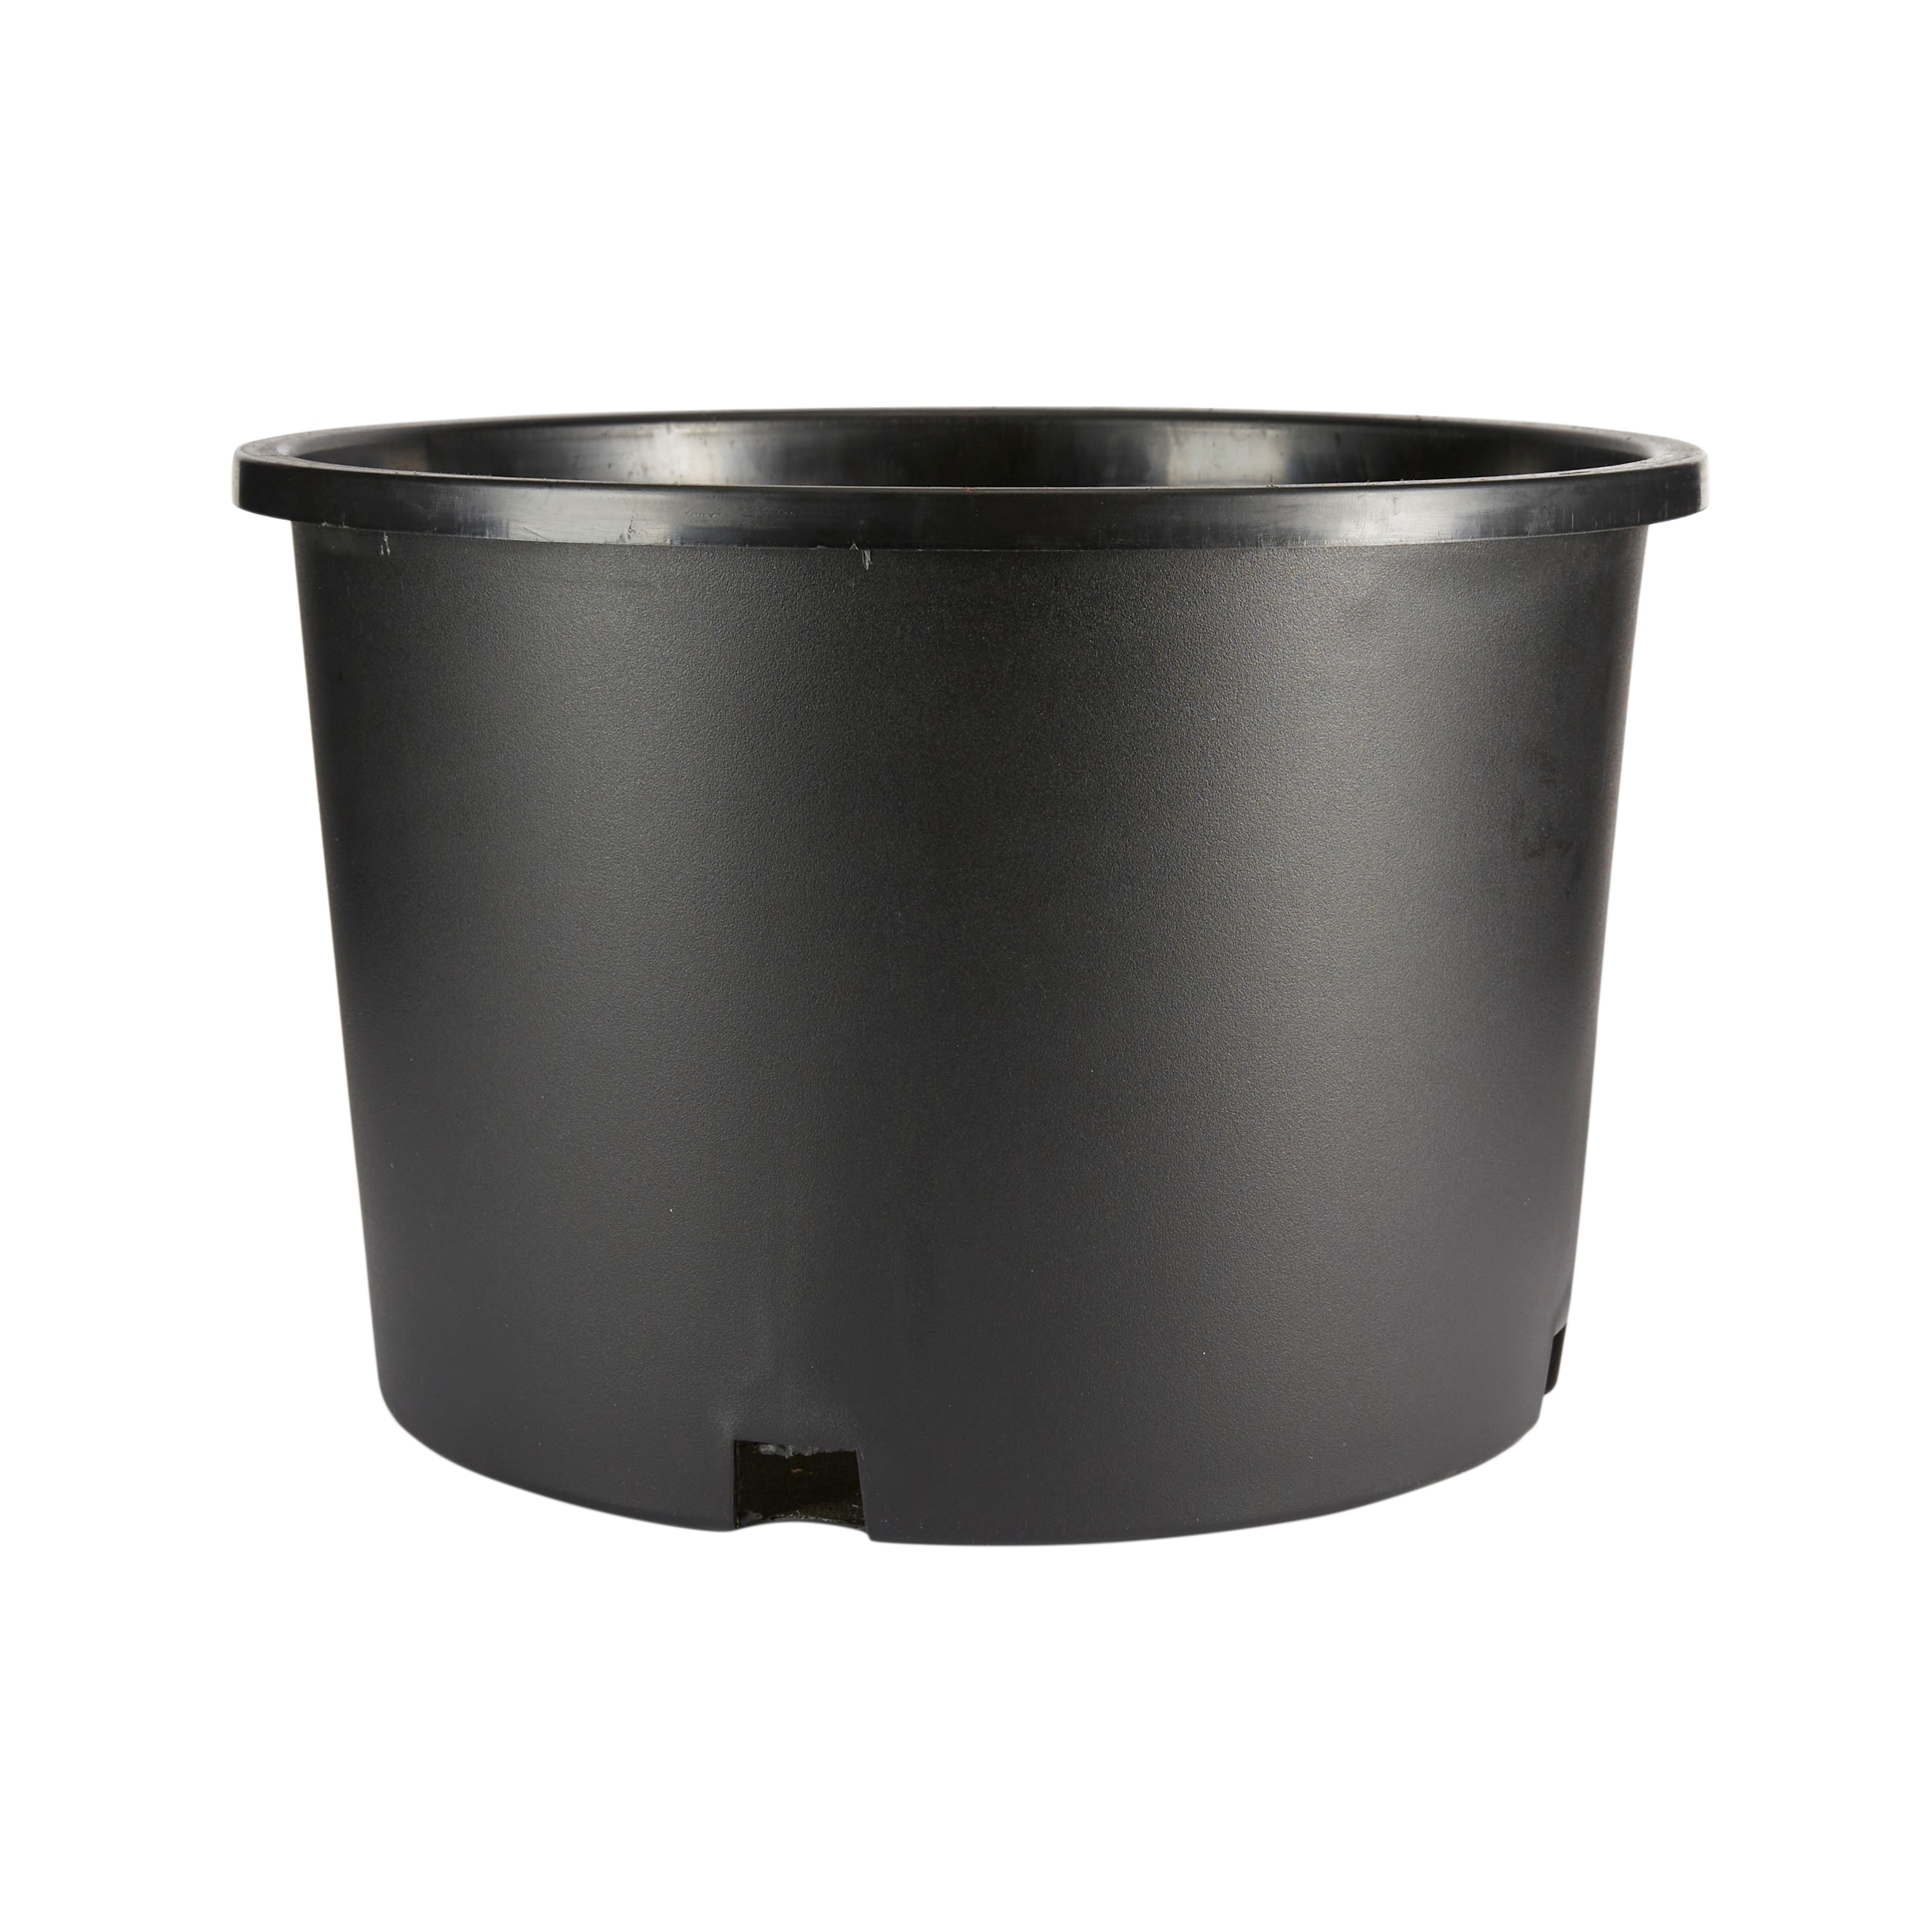 40cm Black Polystone Poly Pot Garden Planter/Plant Container/Round Tub/Tapered 